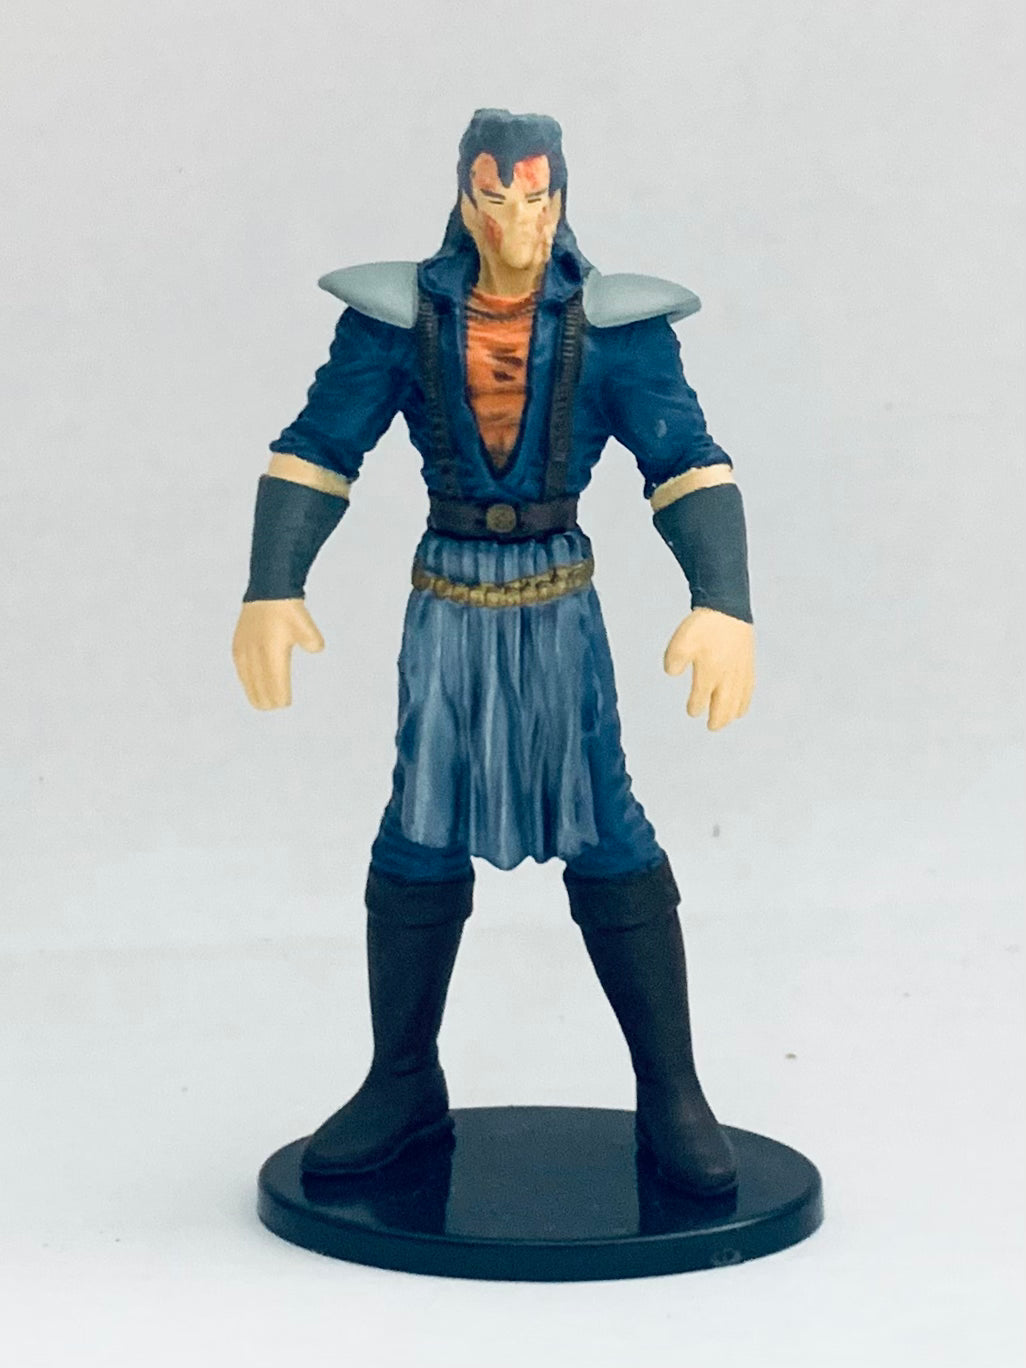 Hokuto no Ken - Shu - Fist of the North Star Legend of Raoh Chapter of Martyrity - Kaiyodo Figure Collection Part 1